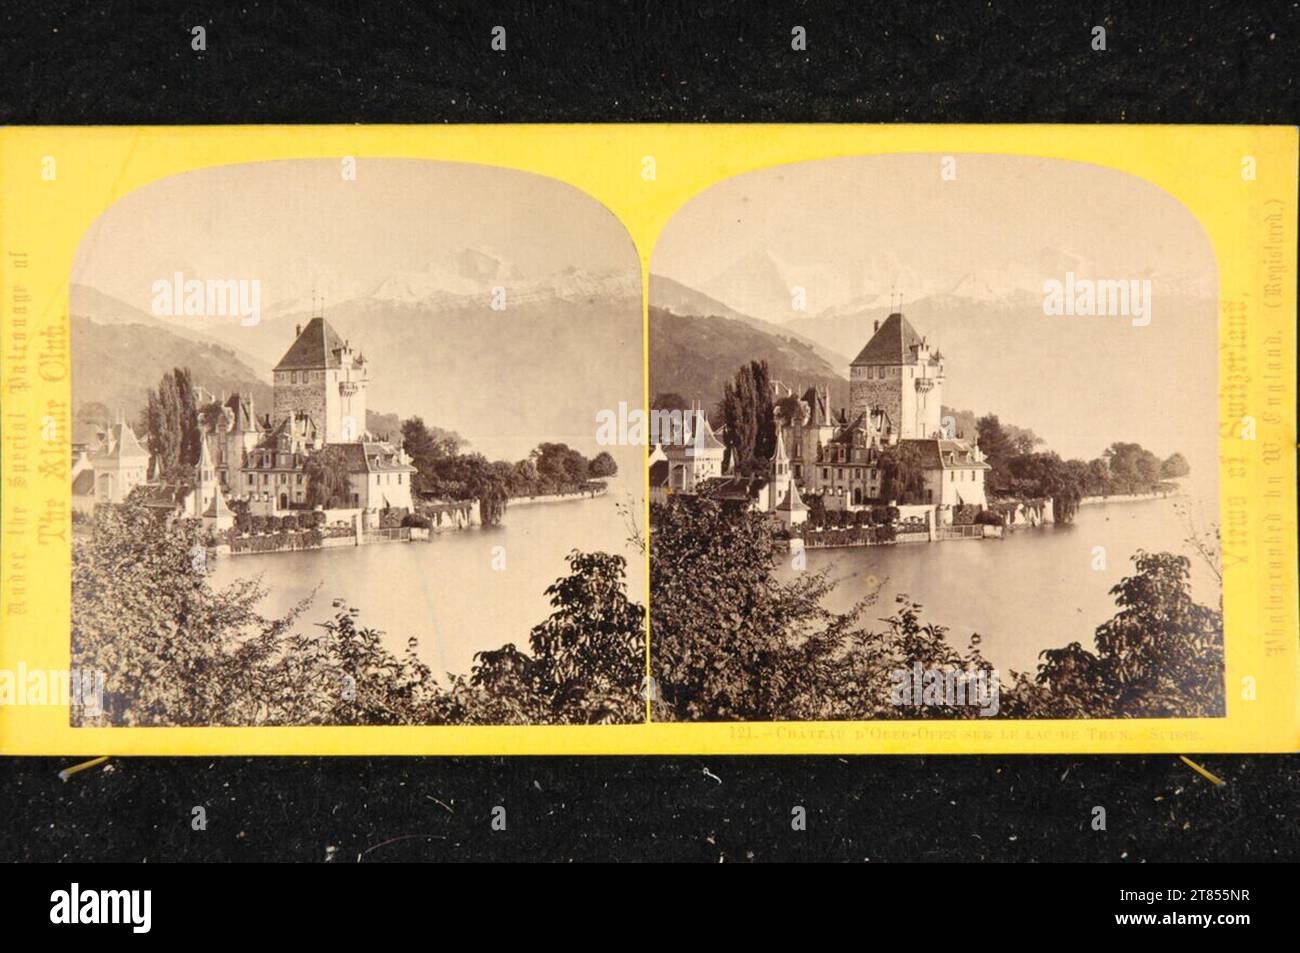 William England Schloss Oberhofen am Thunersee. Albumin paper, on the box box / stereo format 1863 or later Stock Photo